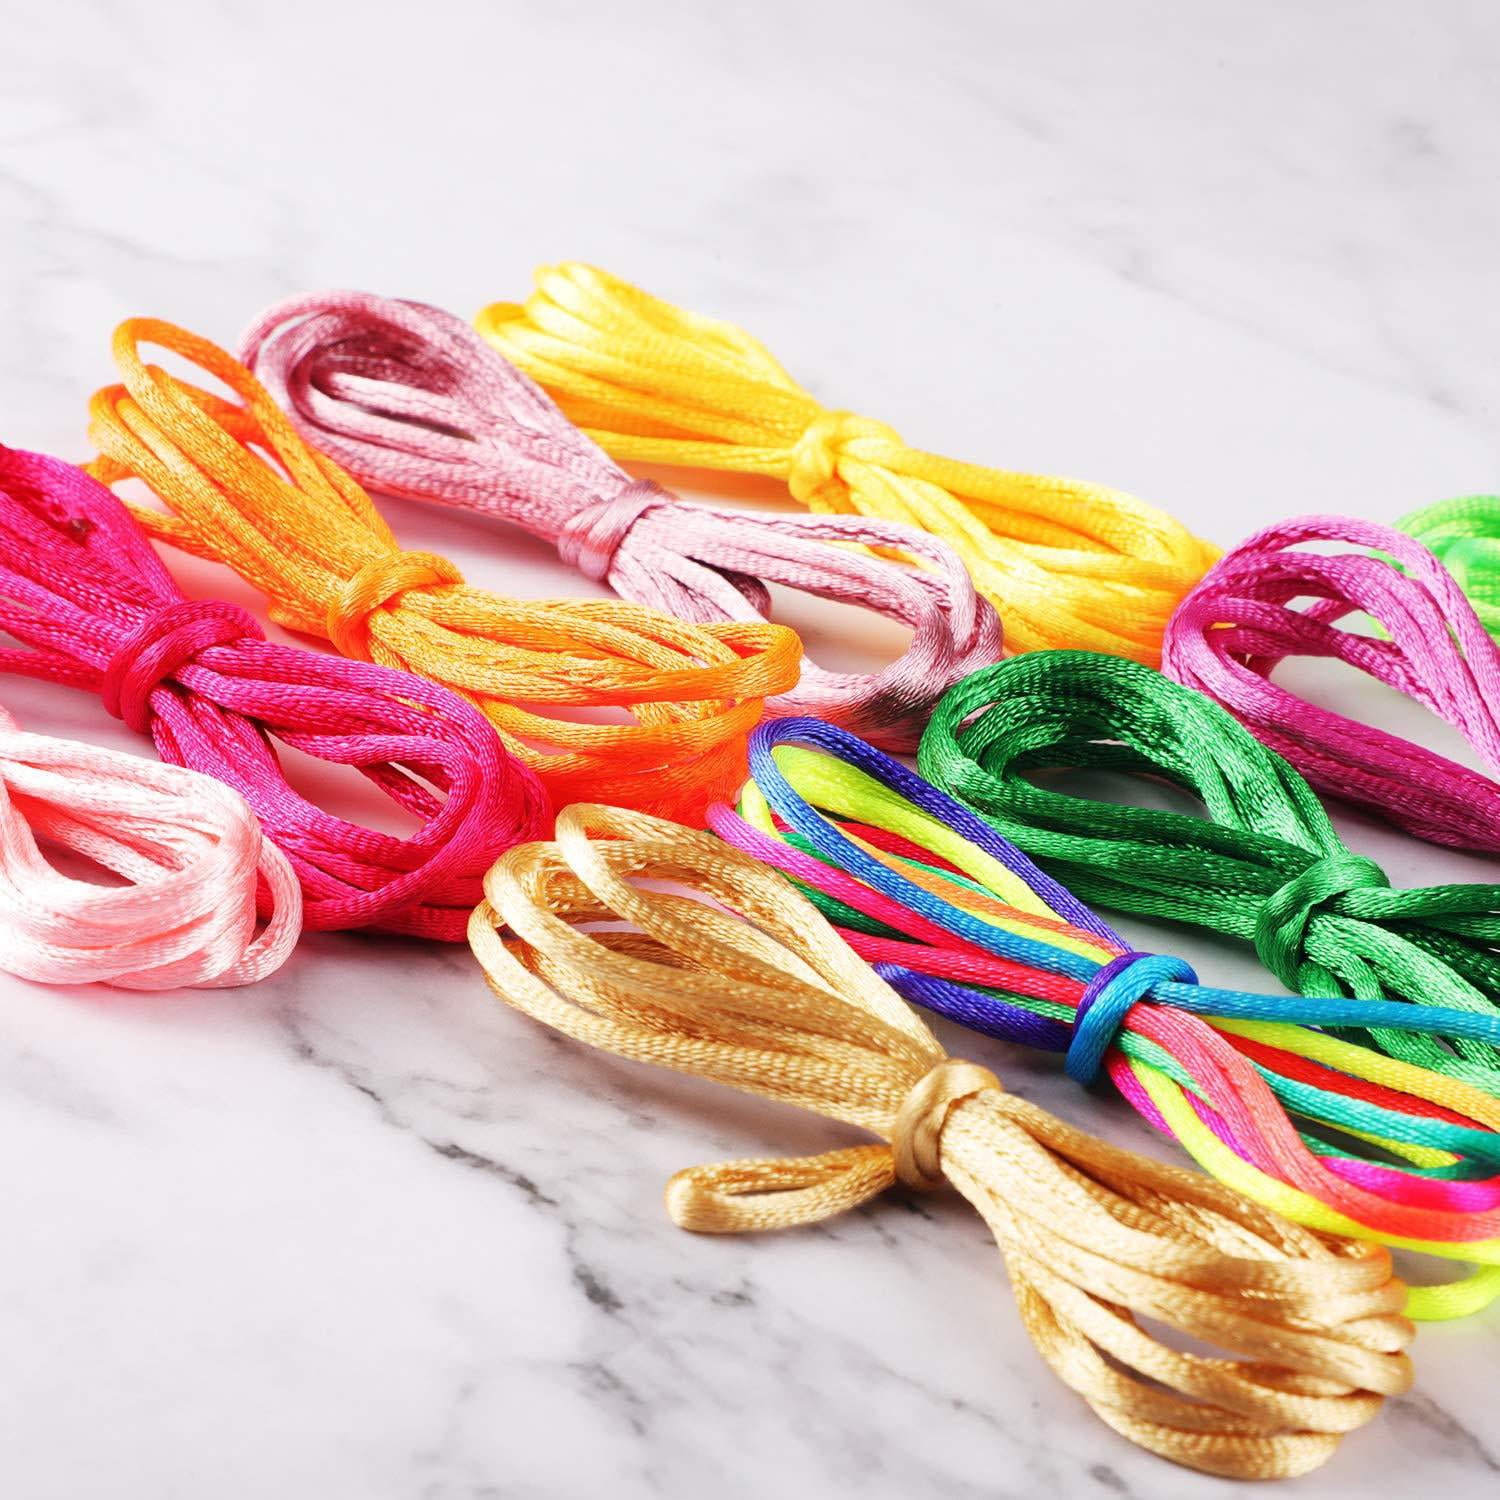 10 Pieces Cats Cradle String Finger Game String String Toy Supplies， 65 Inch Long 10 Colors 